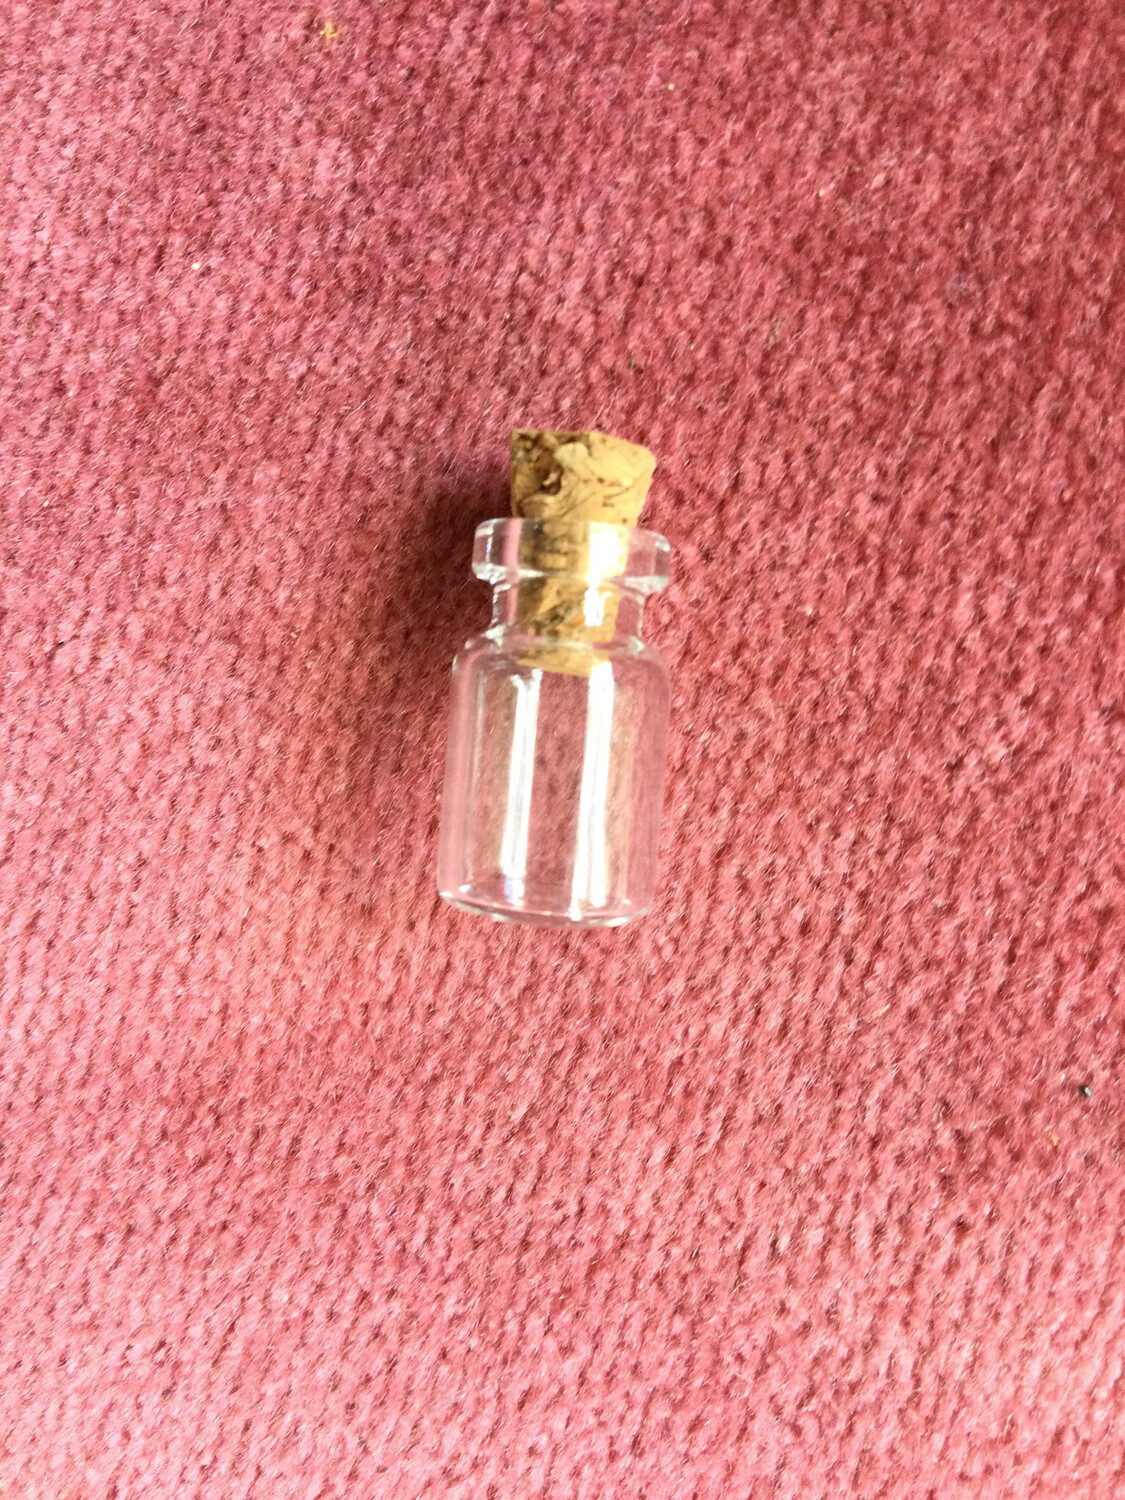 Small Vial Tiny Bottle with Removable Cork Stopper